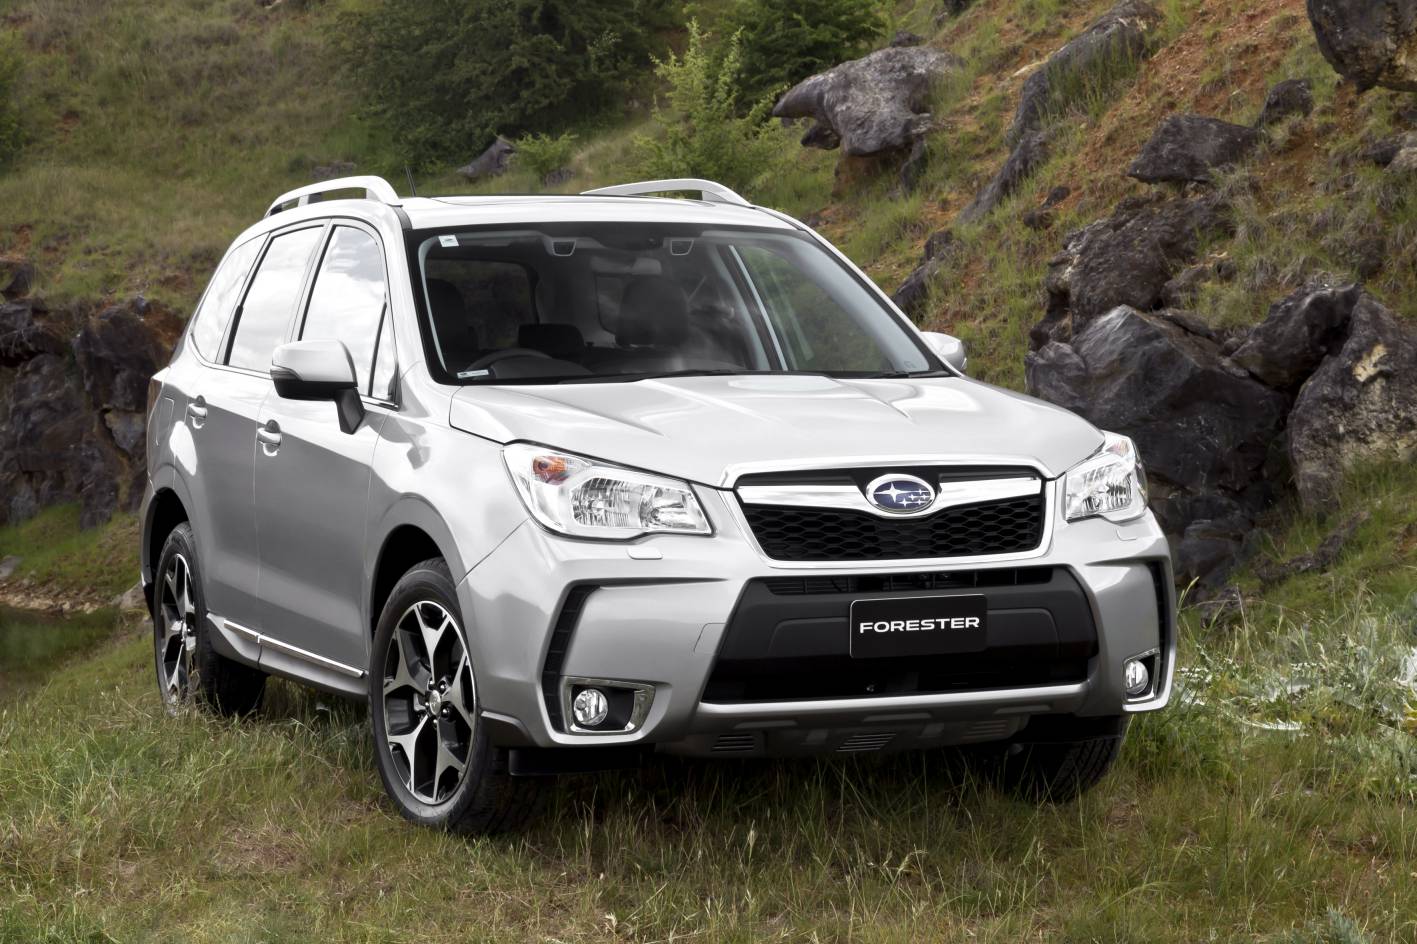 Subaru Cars News 2013 Forester XT on sale from 43,490